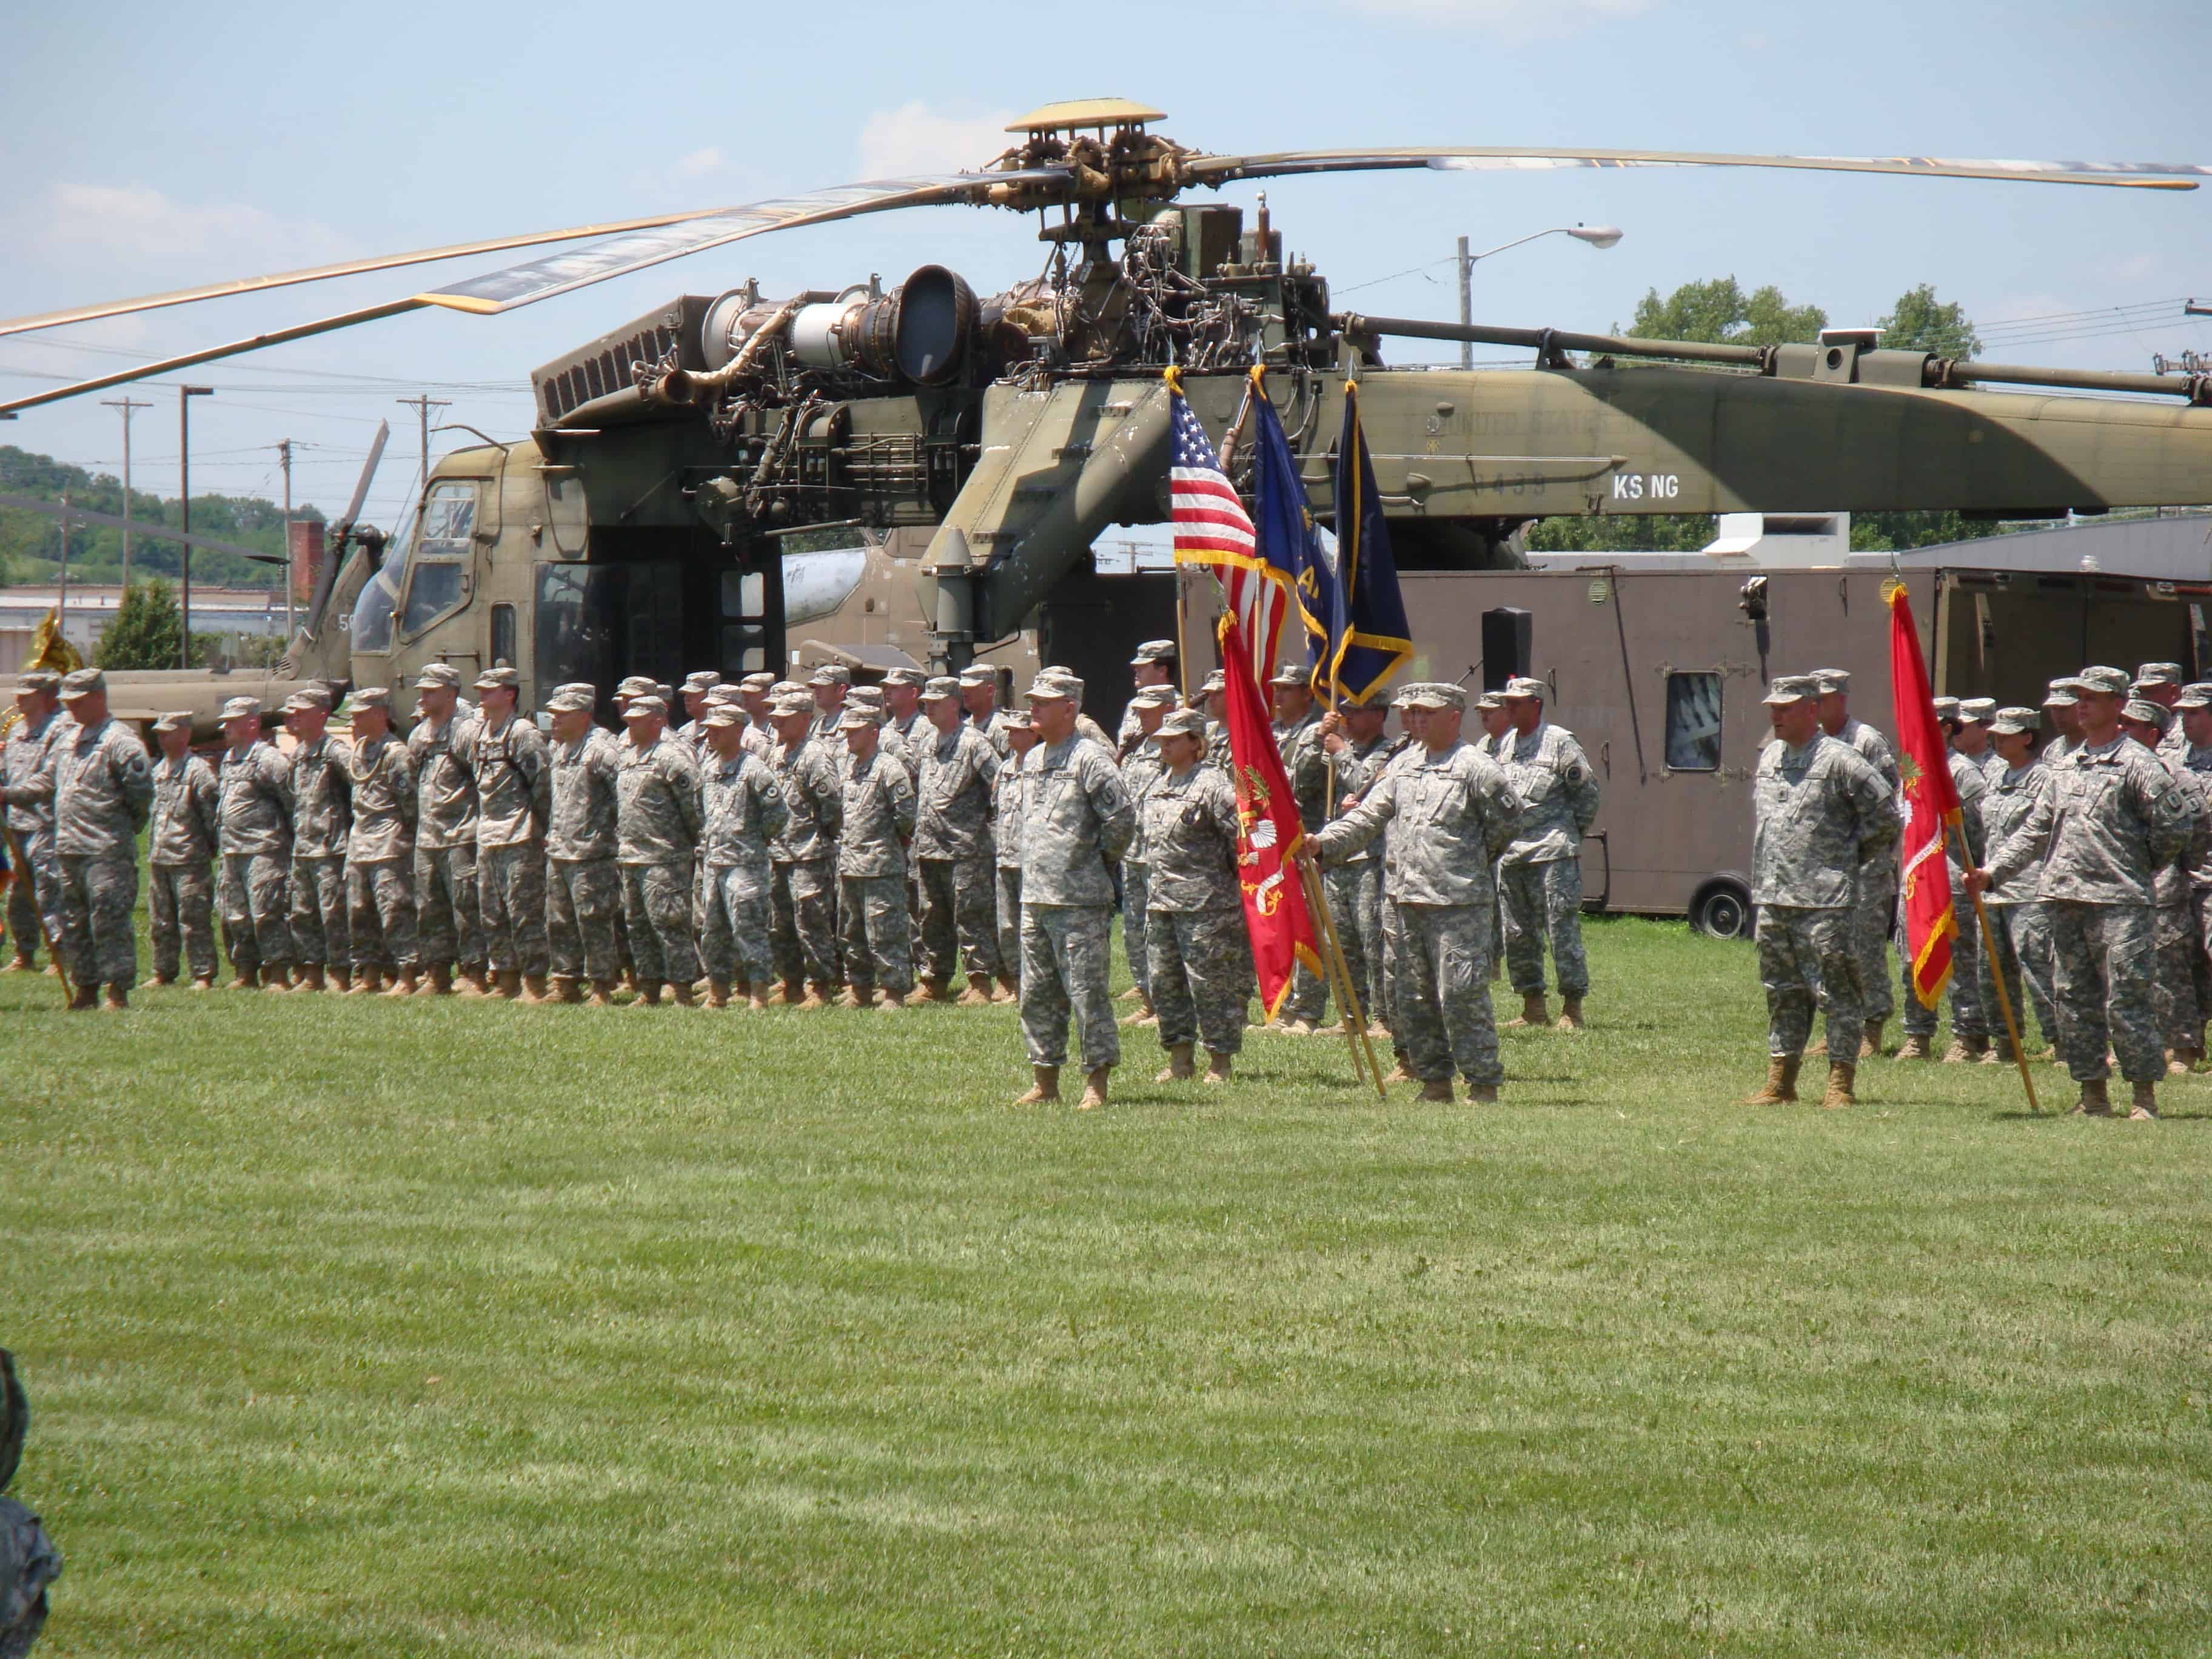 Soldiers stand at attention on the grounds of the Museum of the Kansas National Guard. Behind them sits an enormous transport helicopter.